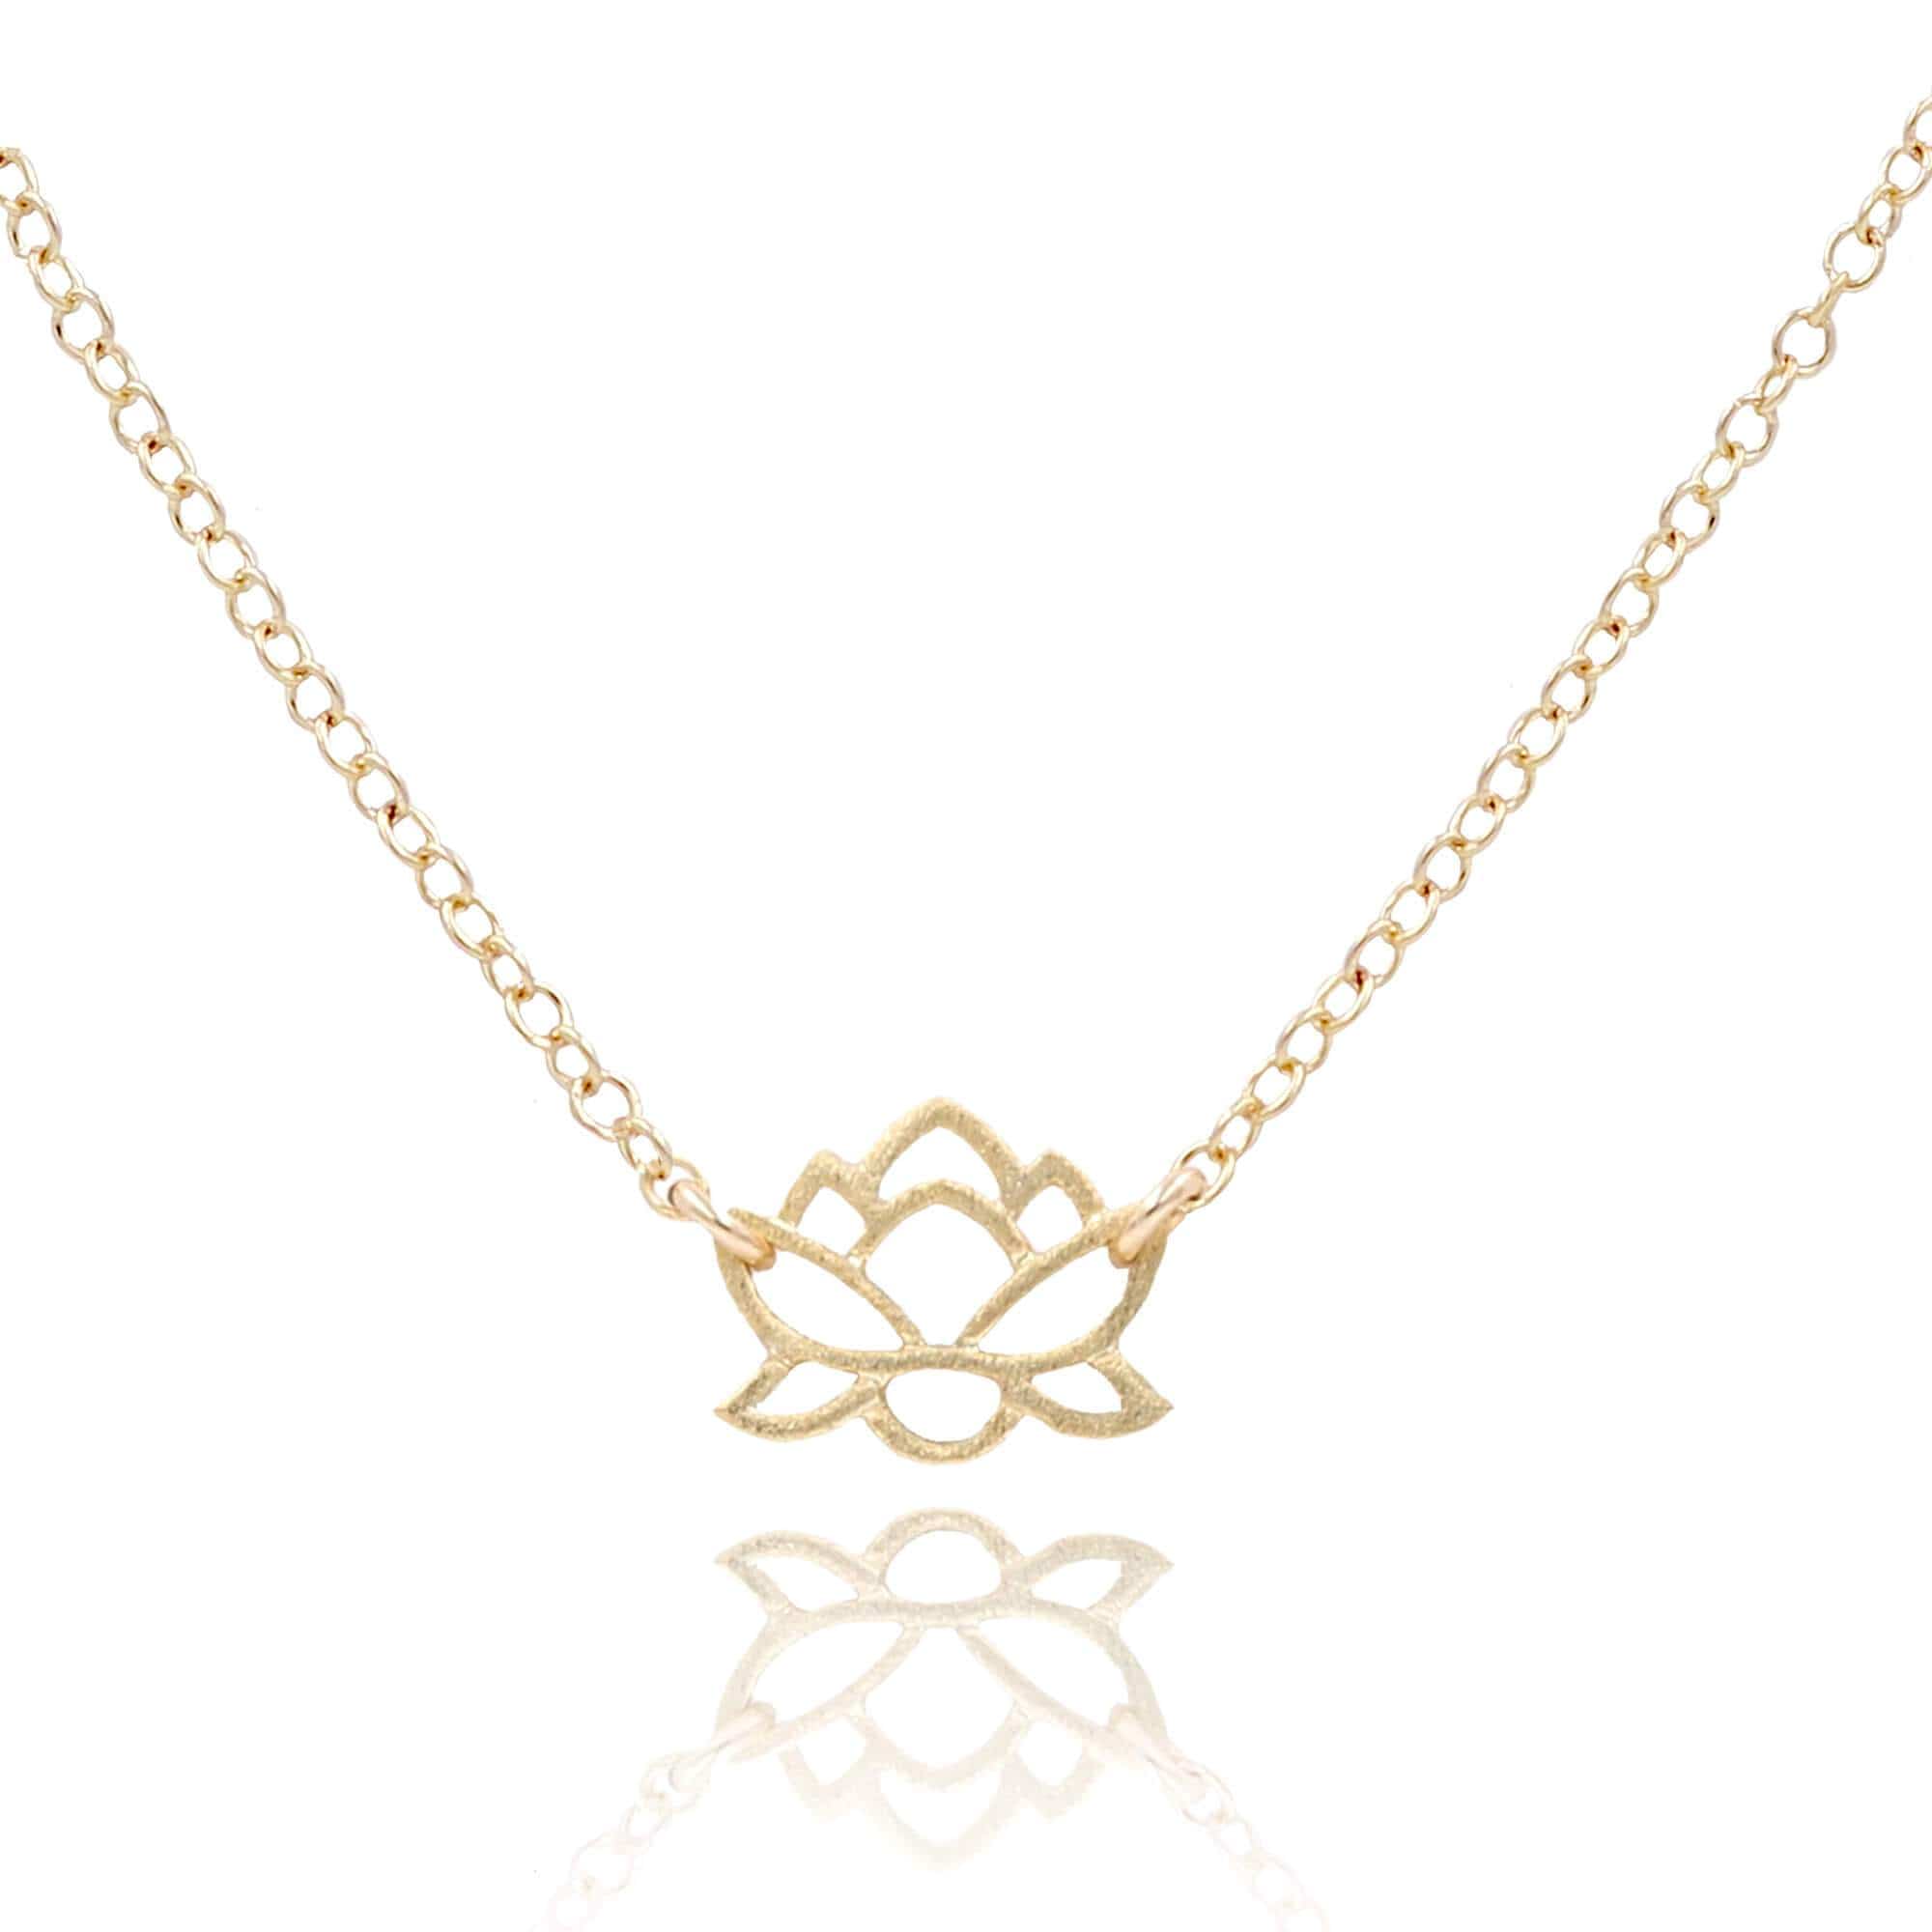 79 lotus necklace mejuri. Gold and vermeil. White Safire. | Lotus necklace,  Necklace, Jewelry